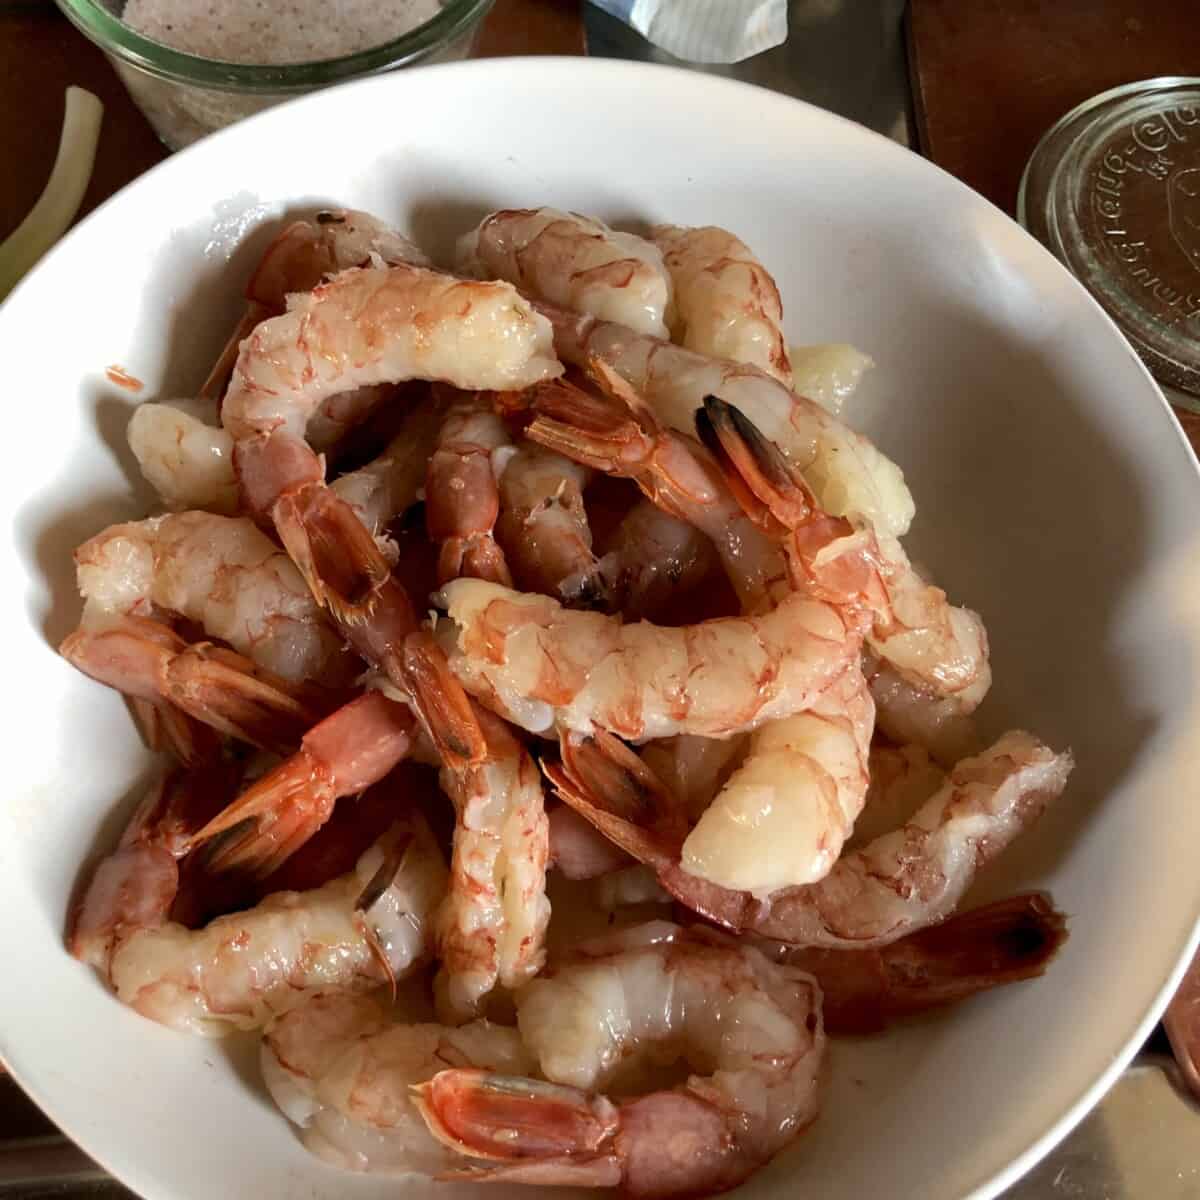 Argentinian red shrimp with shells removed and tails still intact piled high in a white ceramic bowl